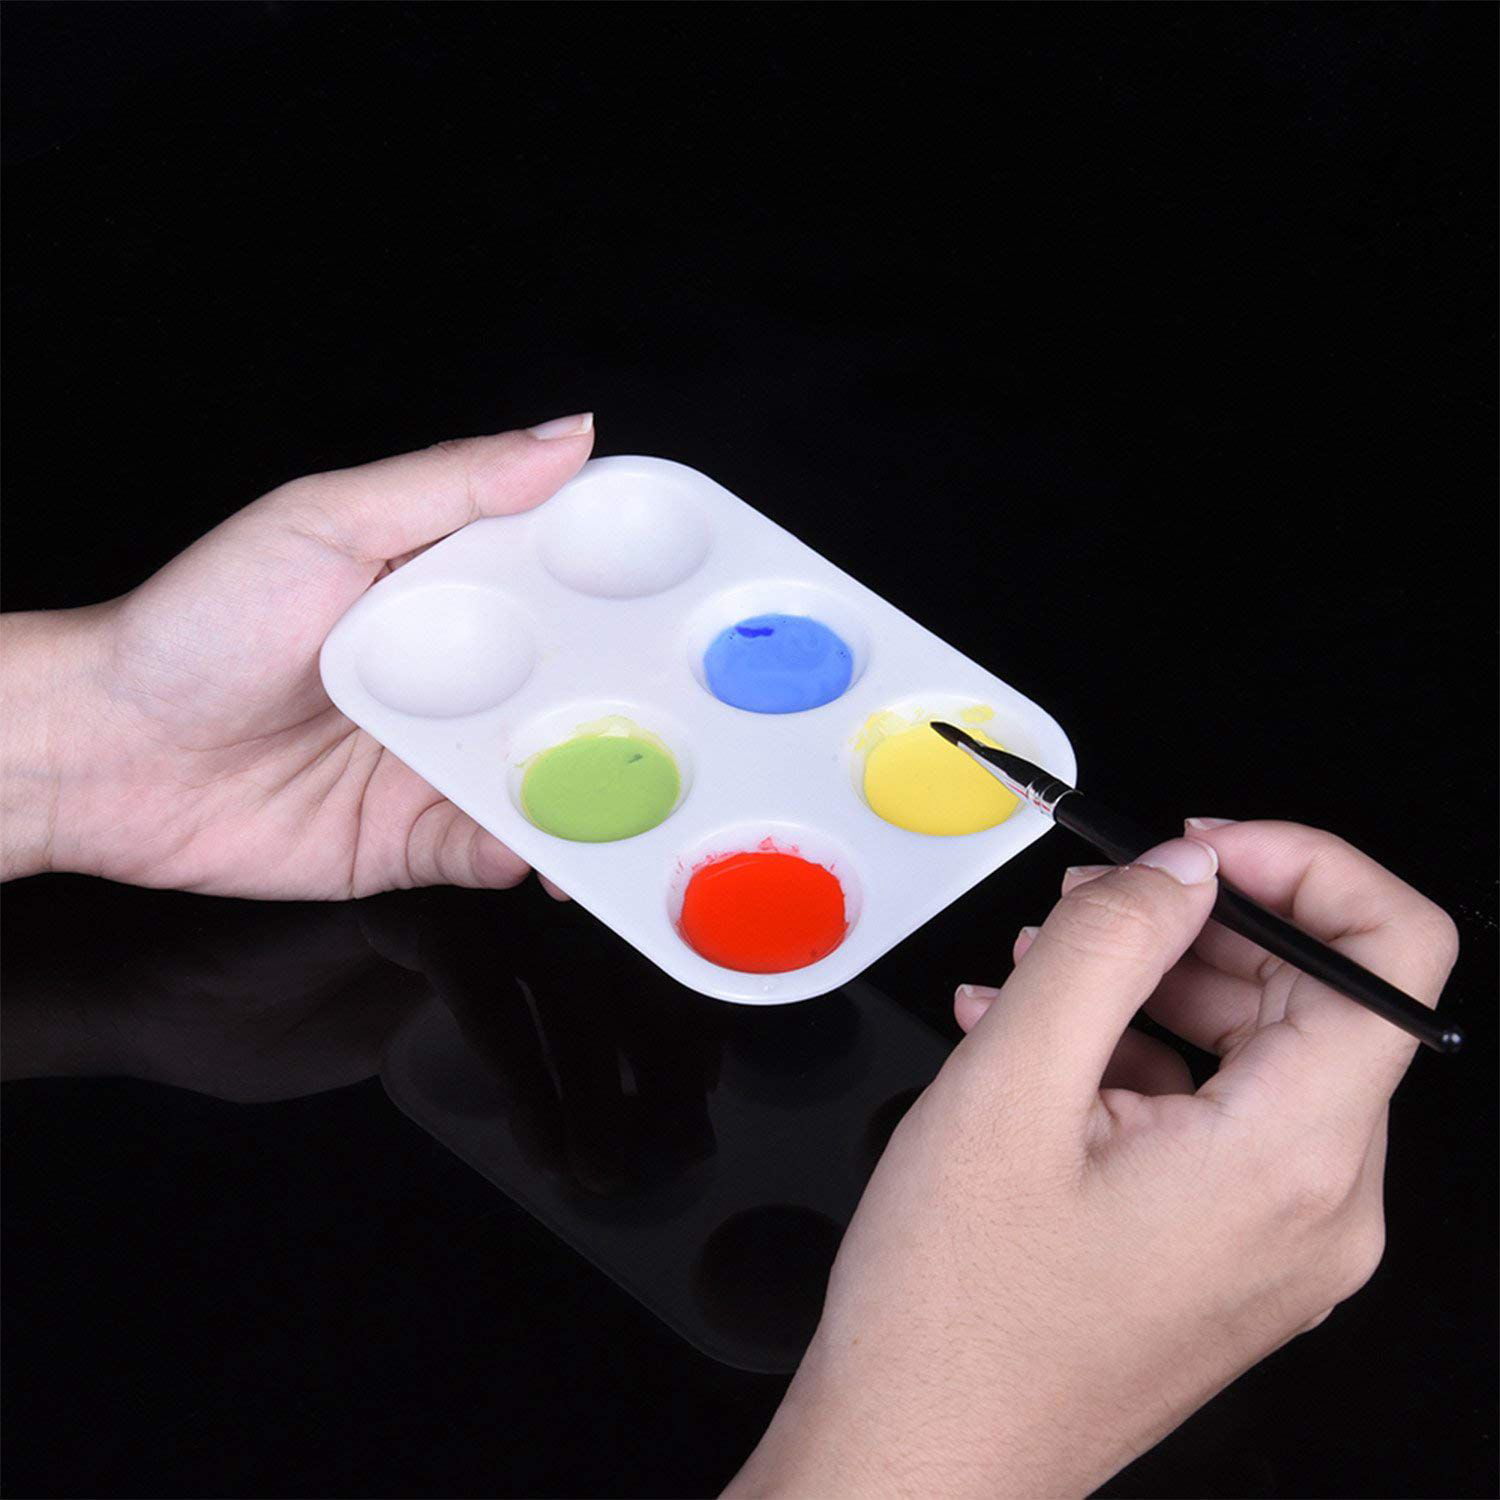 DAIKOYE 30 Pcs White Plastic Paint Palettes 6 Well Rectangular Watercolor Palette Painting Tray for Painting Party DIY Craft and Art Painting